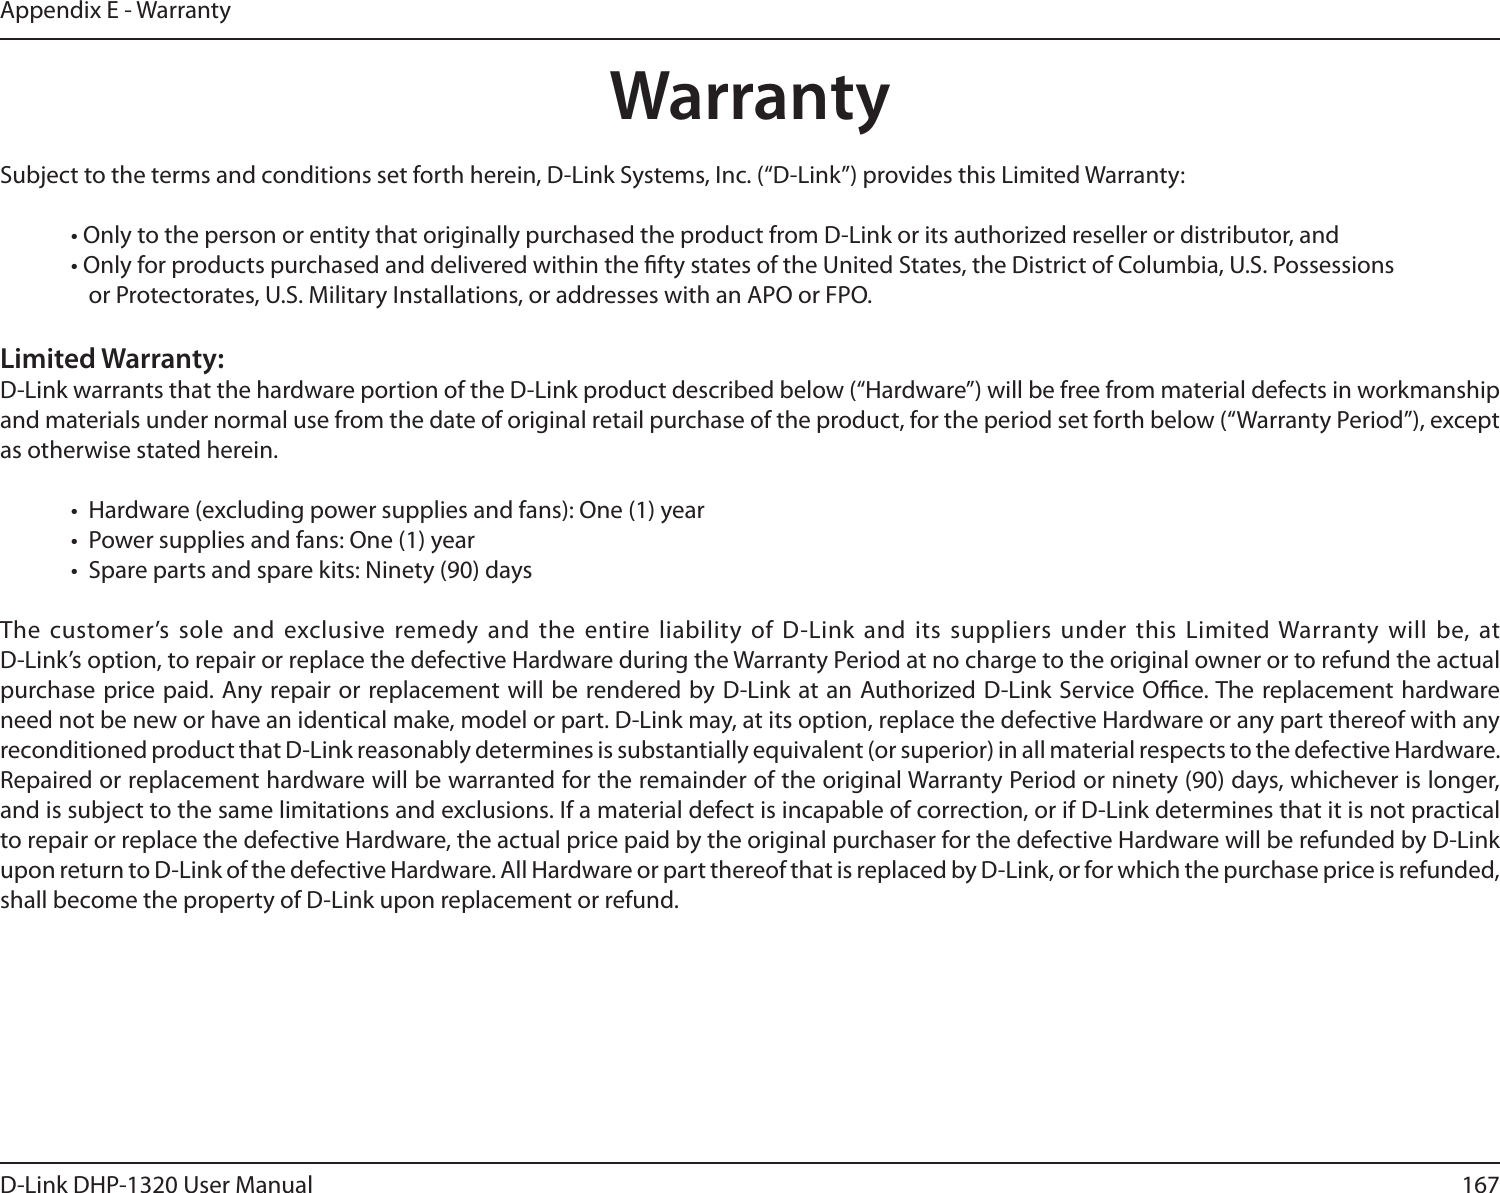 167D-Link DHP-1320 User ManualAppendix E - WarrantyWarrantySubject to the terms and conditions set forth herein, D-Link Systems, Inc. (“D-Link”) provides this Limited Warranty:• Only to the person or entity that originally purchased the product from D-Link or its authorized reseller or distributor, and• Only for products purchased and delivered within the fty states of the United States, the District of Columbia, U.S. Possessions       or Protectorates, U.S. Military Installations, or addresses with an APO or FPO.Limited Warranty:D-Link warrants that the hardware portion of the D-Link product described below (“Hardware”) will be free from material defects in workmanship and materials under normal use from the date of original retail purchase of the product, for the period set forth below (“Warranty Period”), except as otherwise stated herein.•  Hardware (excluding power supplies and fans): One (1) year•  Power supplies and fans: One (1) year•  Spare parts and spare kits: Ninety (90) daysThe customer’s sole  and  exclusive remedy and the entire liability of D-Link  and  its  suppliers  under  this  Limited Warranty will be, at  D-Link’s option, to repair or replace the defective Hardware during the Warranty Period at no charge to the original owner or to refund the actual purchase price paid. Any repair or replacement will be rendered by D-Link at an Authorized D-Link Service Oce. The replacement hardware need not be new or have an identical make, model or part. D-Link may, at its option, replace the defective Hardware or any part thereof with any reconditioned product that D-Link reasonably determines is substantially equivalent (or superior) in all material respects to the defective Hardware. Repaired or replacement hardware will be warranted for the remainder of the original Warranty Period or ninety (90) days, whichever is longer, and is subject to the same limitations and exclusions. If a material defect is incapable of correction, or if D-Link determines that it is not practical to repair or replace the defective Hardware, the actual price paid by the original purchaser for the defective Hardware will be refunded by D-Link upon return to D-Link of the defective Hardware. All Hardware or part thereof that is replaced by D-Link, or for which the purchase price is refunded, shall become the property of D-Link upon replacement or refund.